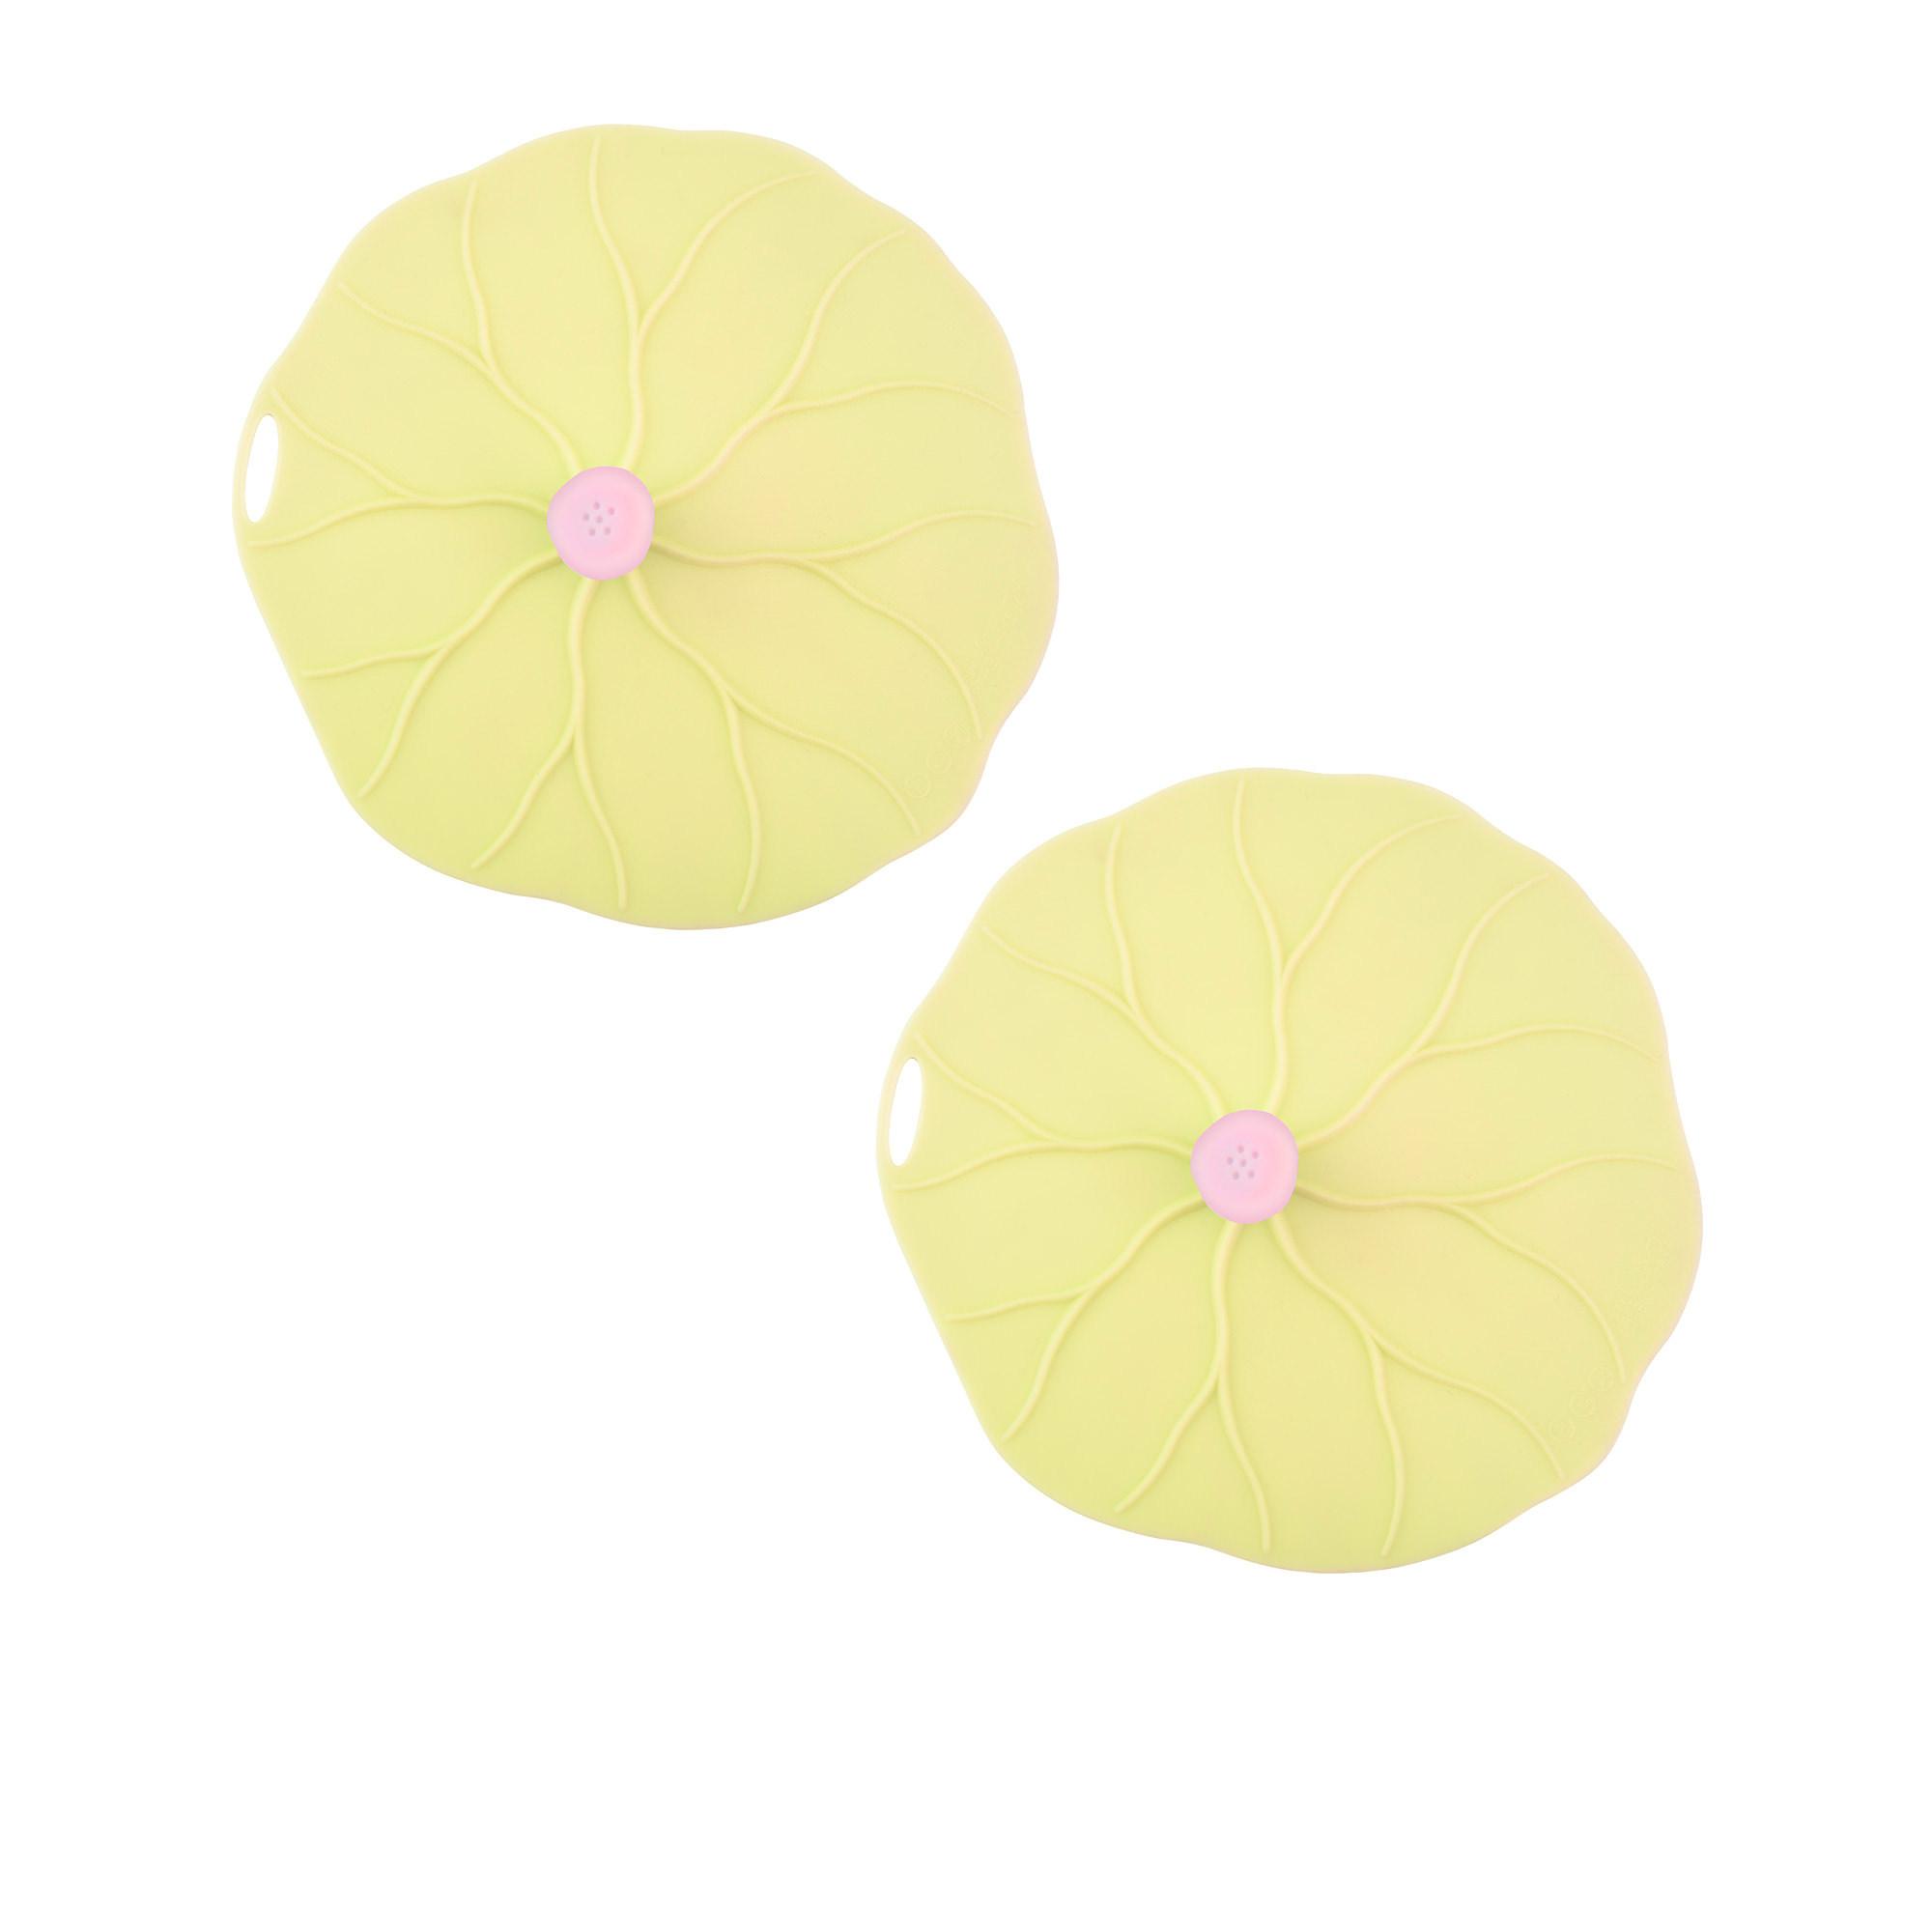 Avanti Silicone Lid Cover Small Set of 2 Image 1